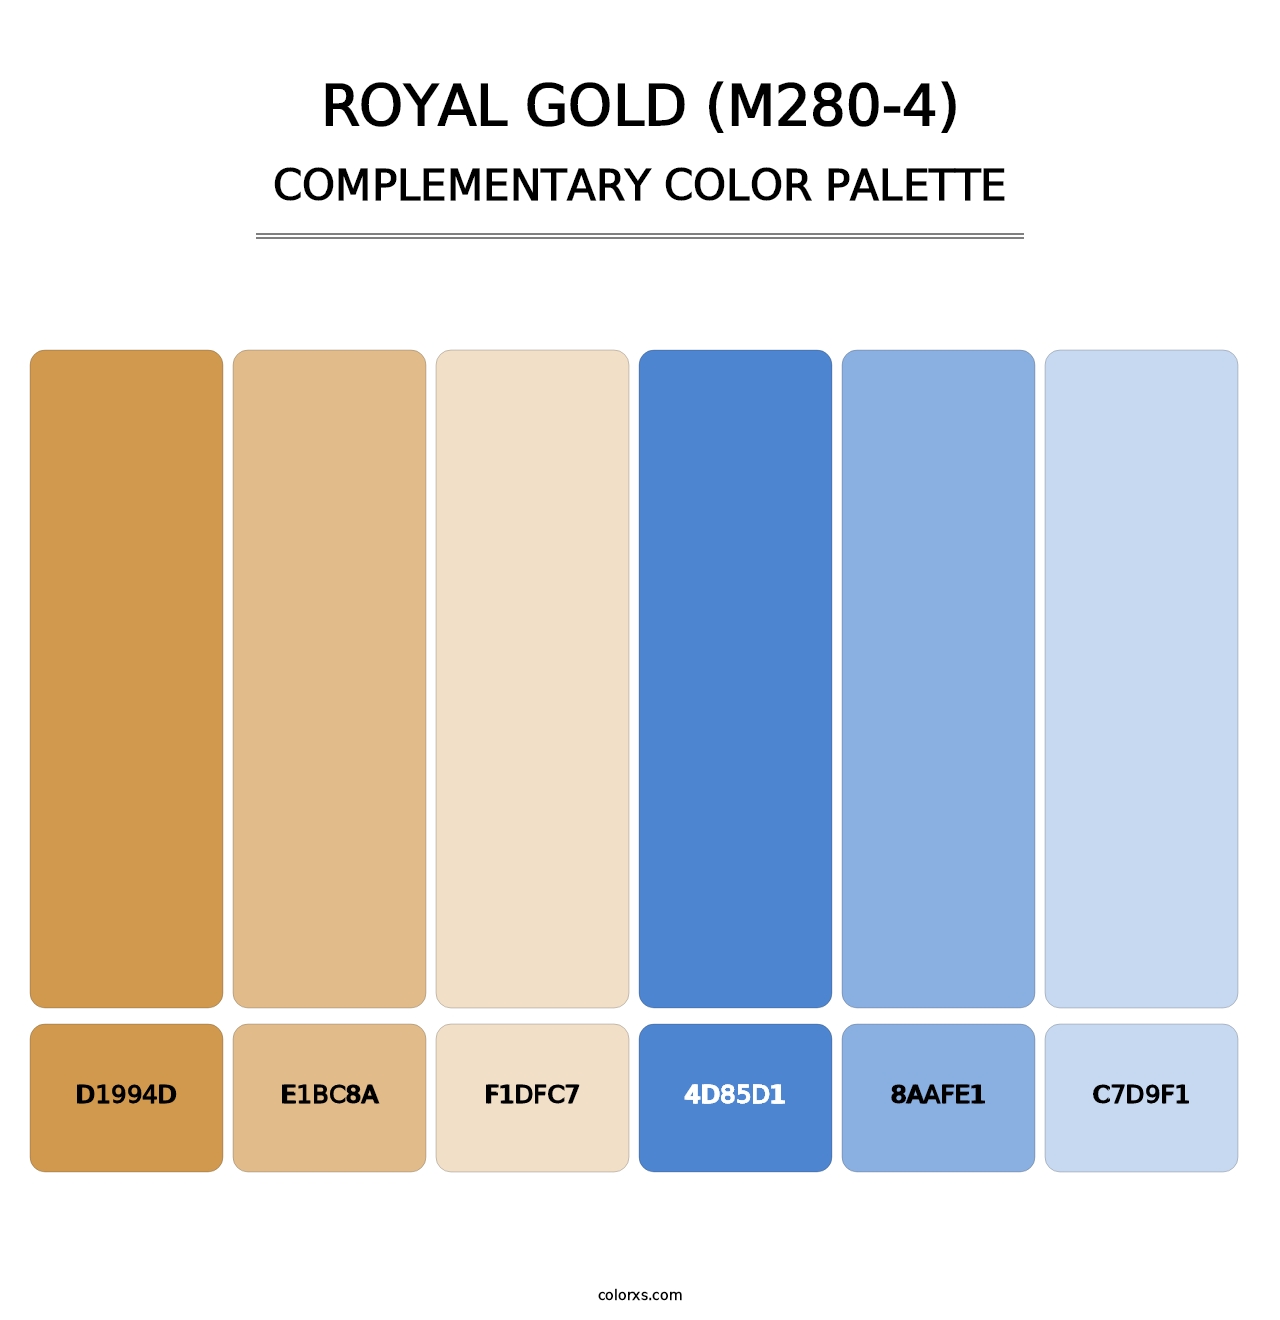 Royal Gold (M280-4) - Complementary Color Palette